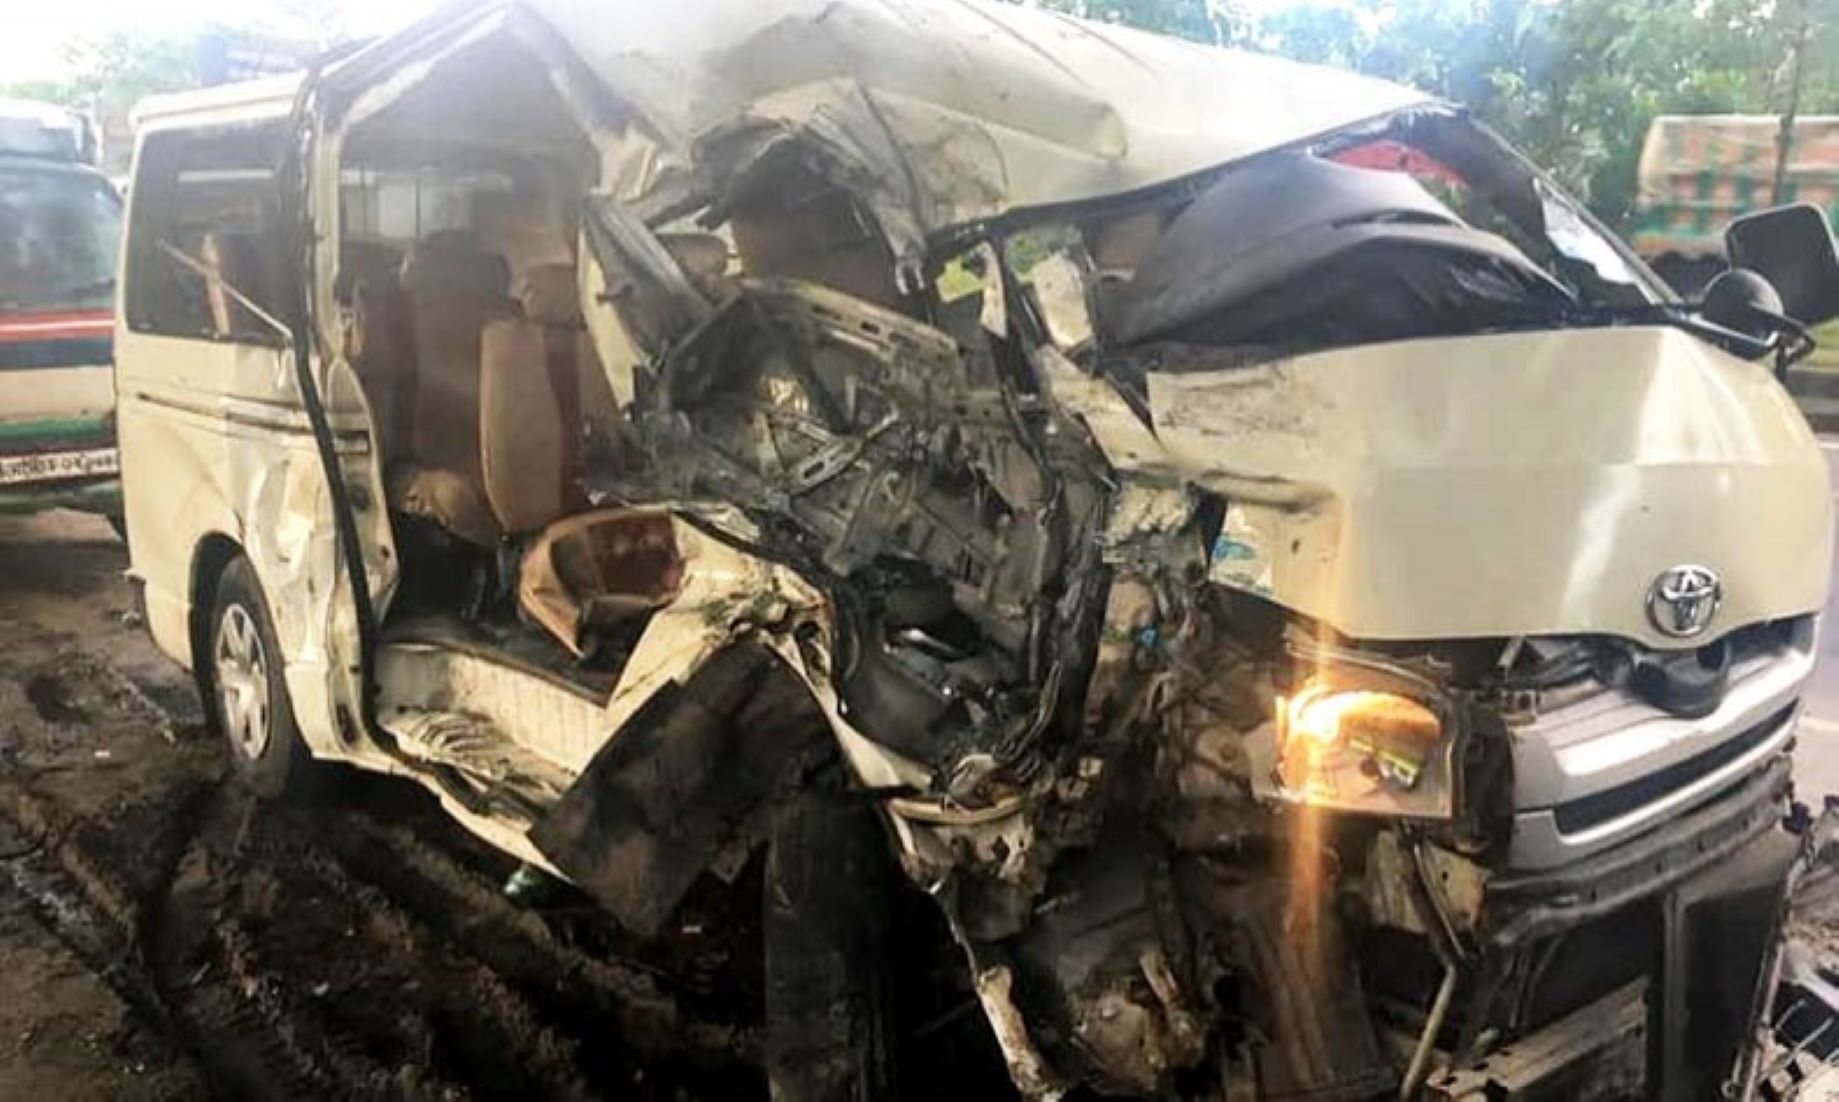 Traffic Accident Killed Six, Injured 12 In Southern Egypt